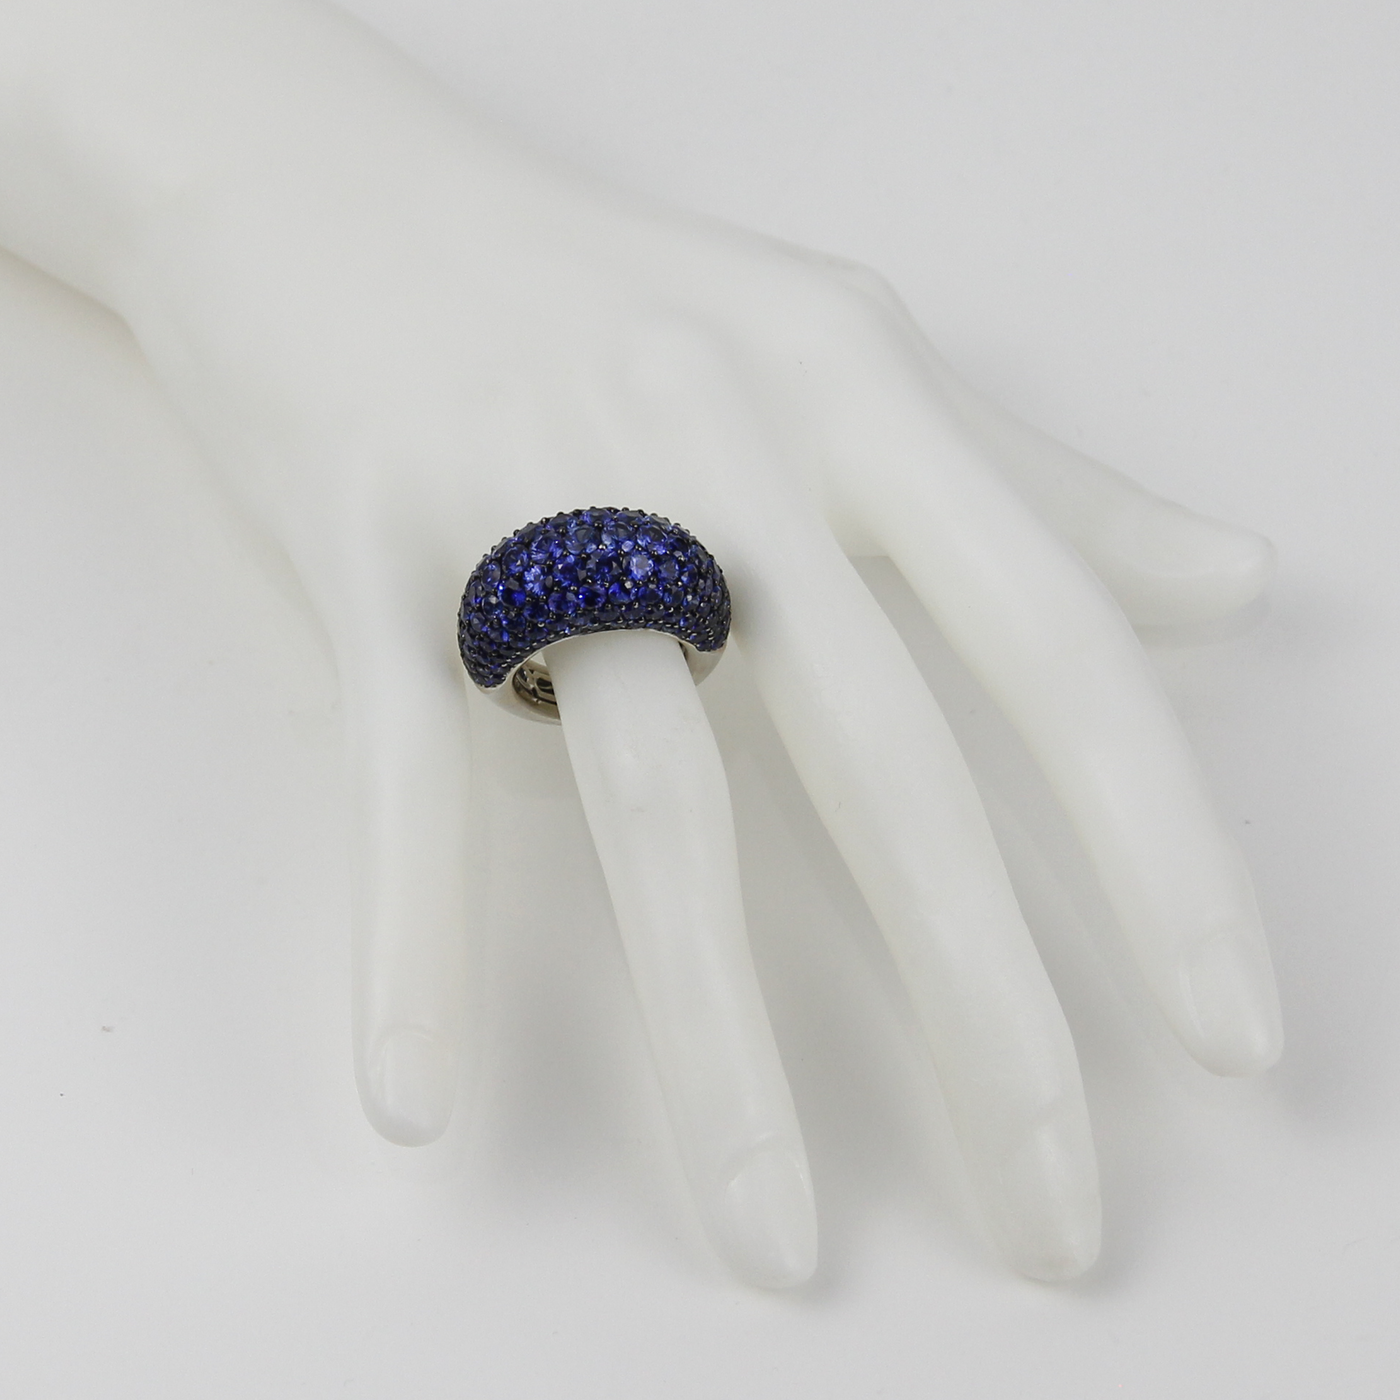 ECJ Collection 18K White Gold 10.41ctw Sapphire Ring